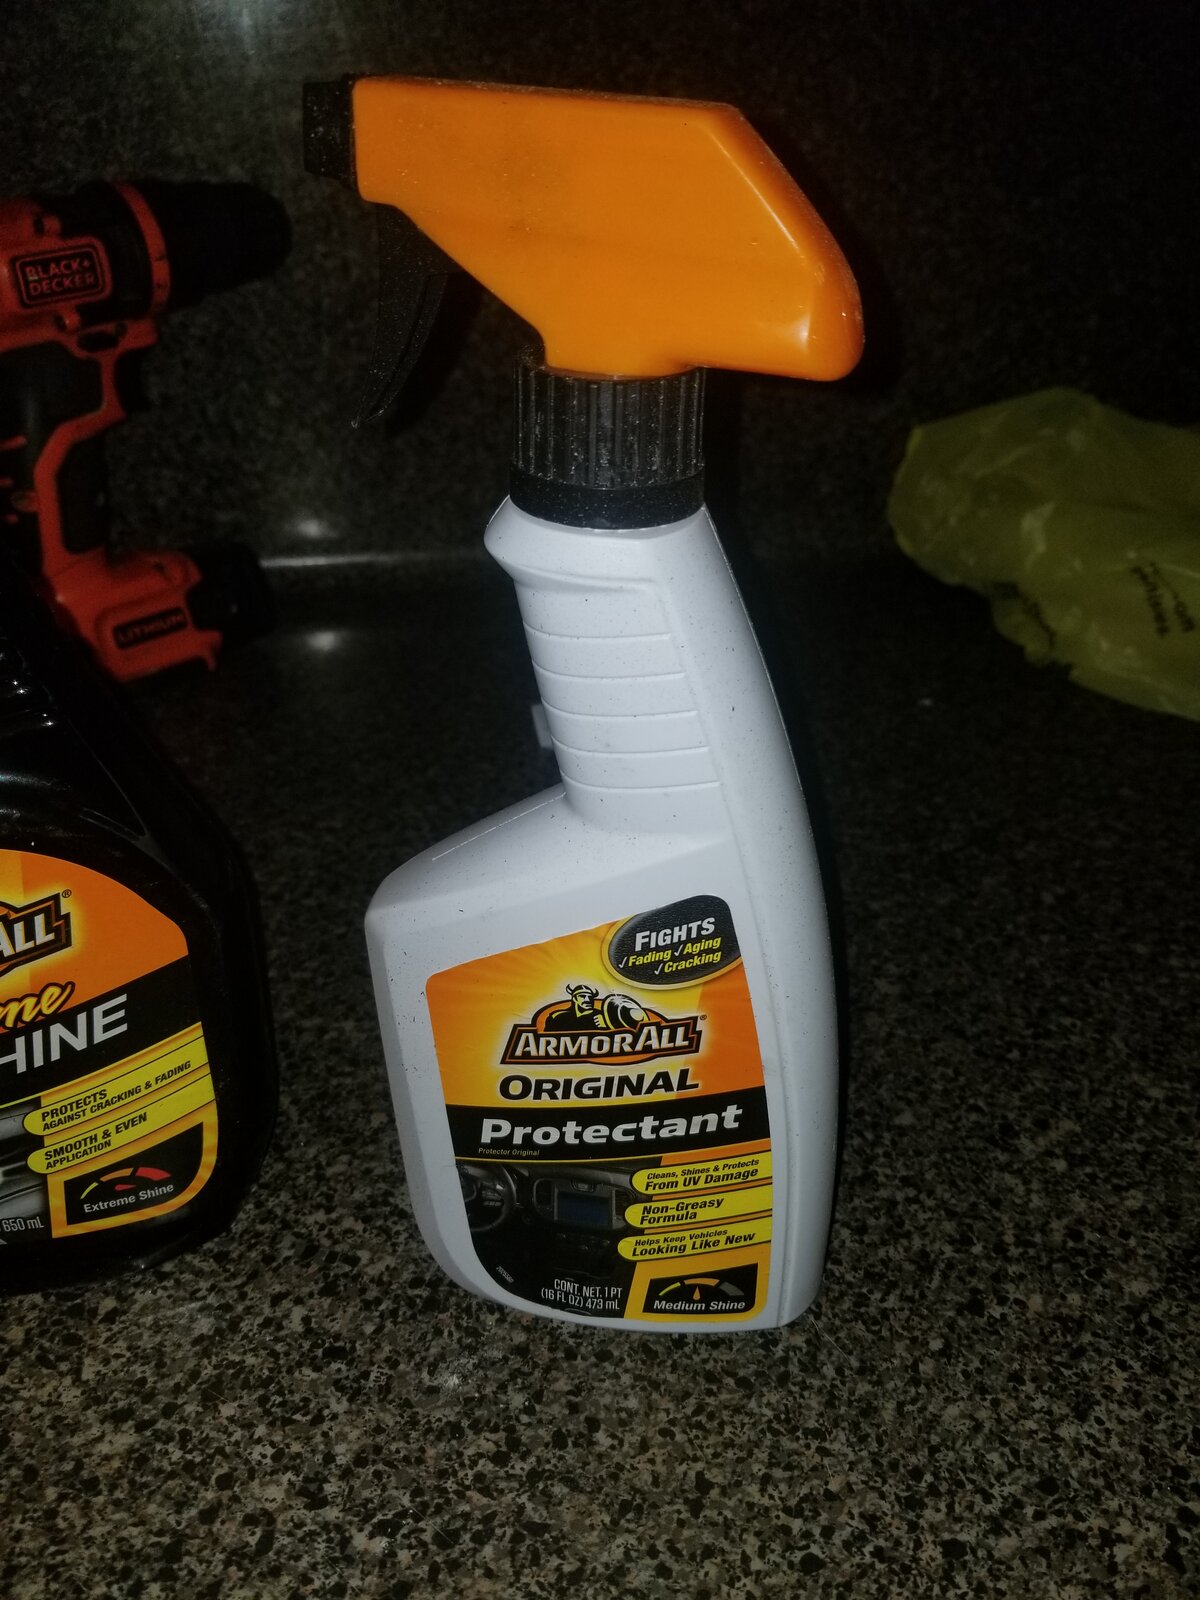 armor protectant spray can i use it on my rc car to clean the dirt ?